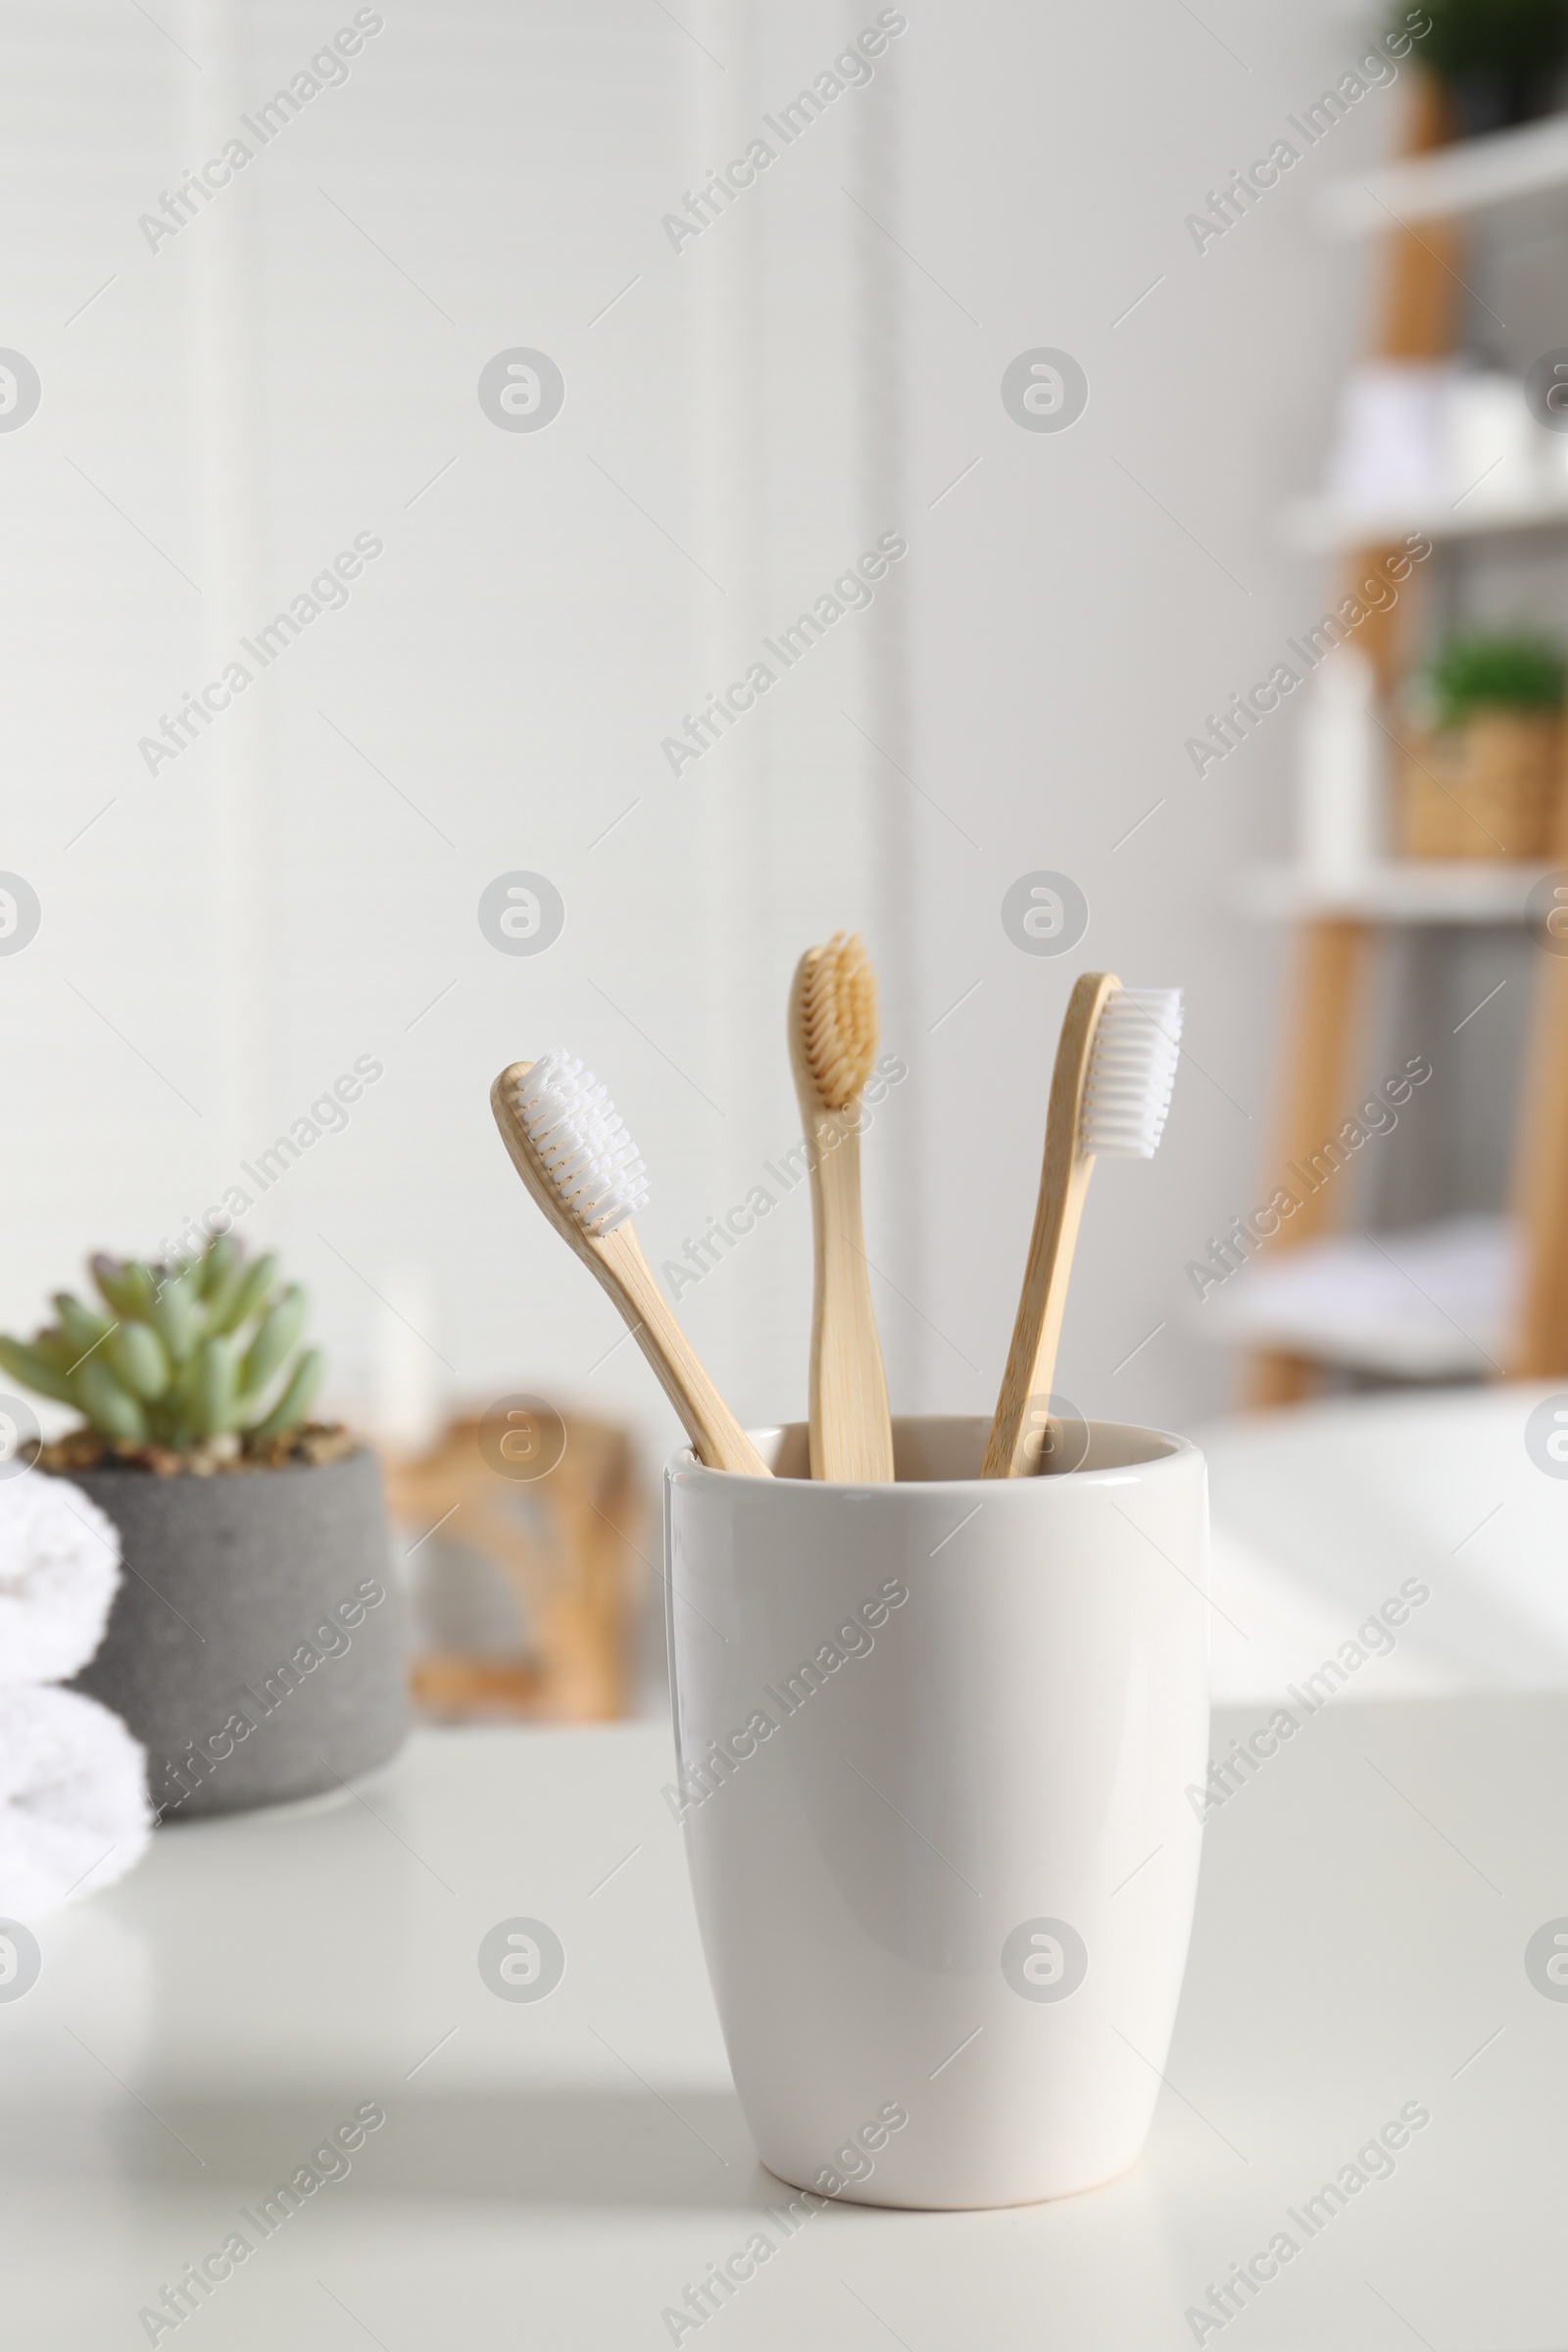 Photo of Holder with bamboo toothbrushes on white countertop in bathroom